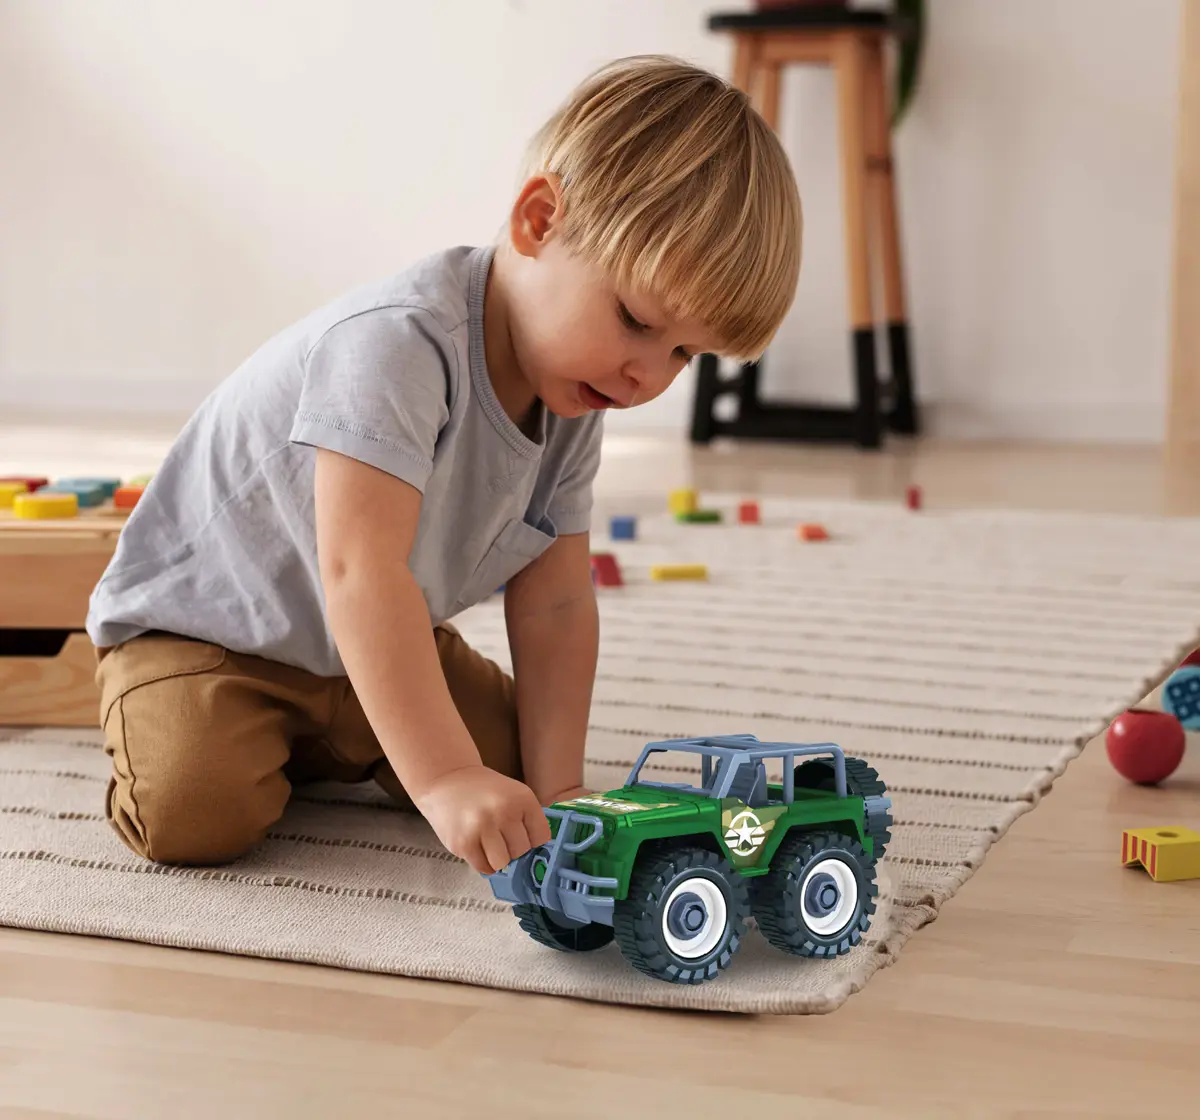 Mighty Machines Tactical Mpv Construction Vechile for kids 3Y+, Multicolour